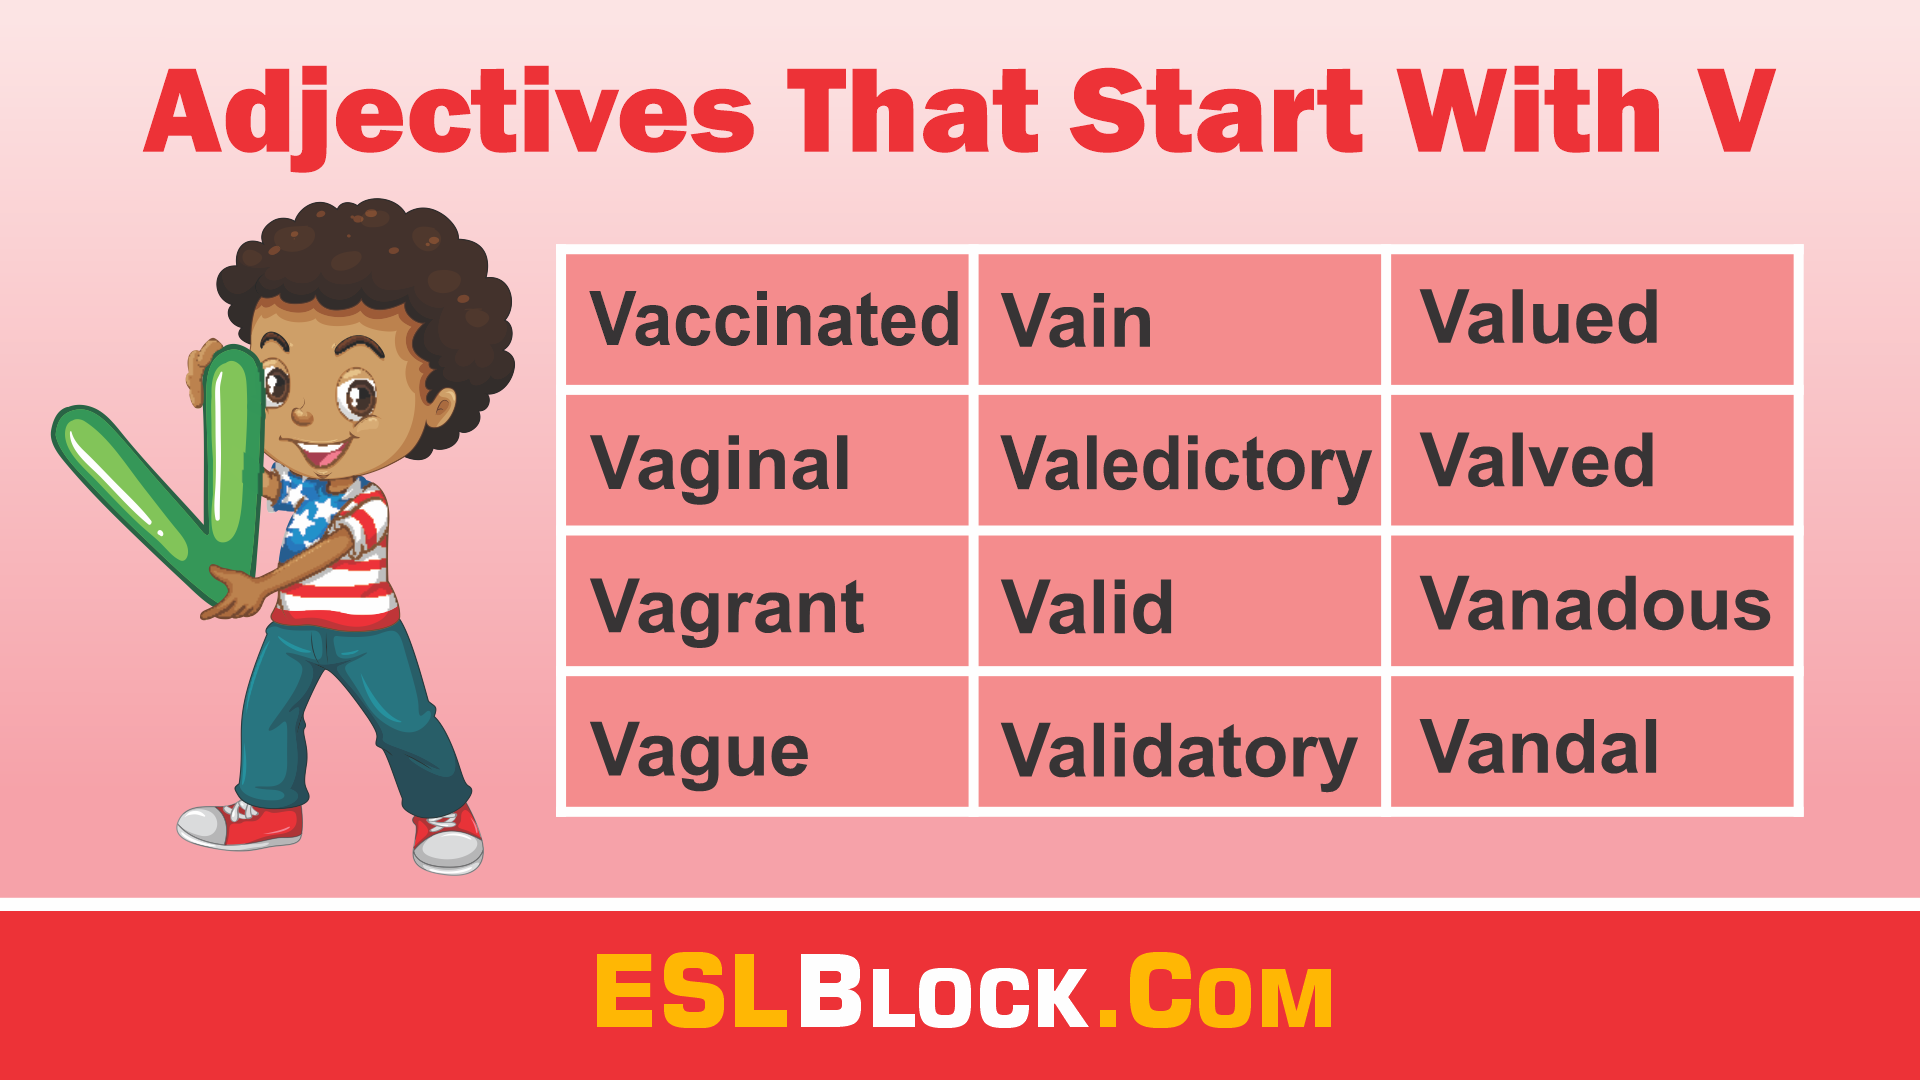 A-Z Adjectives, Adjective Words, Adjectives, V Words, Vocabulary, Words That Describe a Person, Adjectives that start with V, Descriptive words that start with V